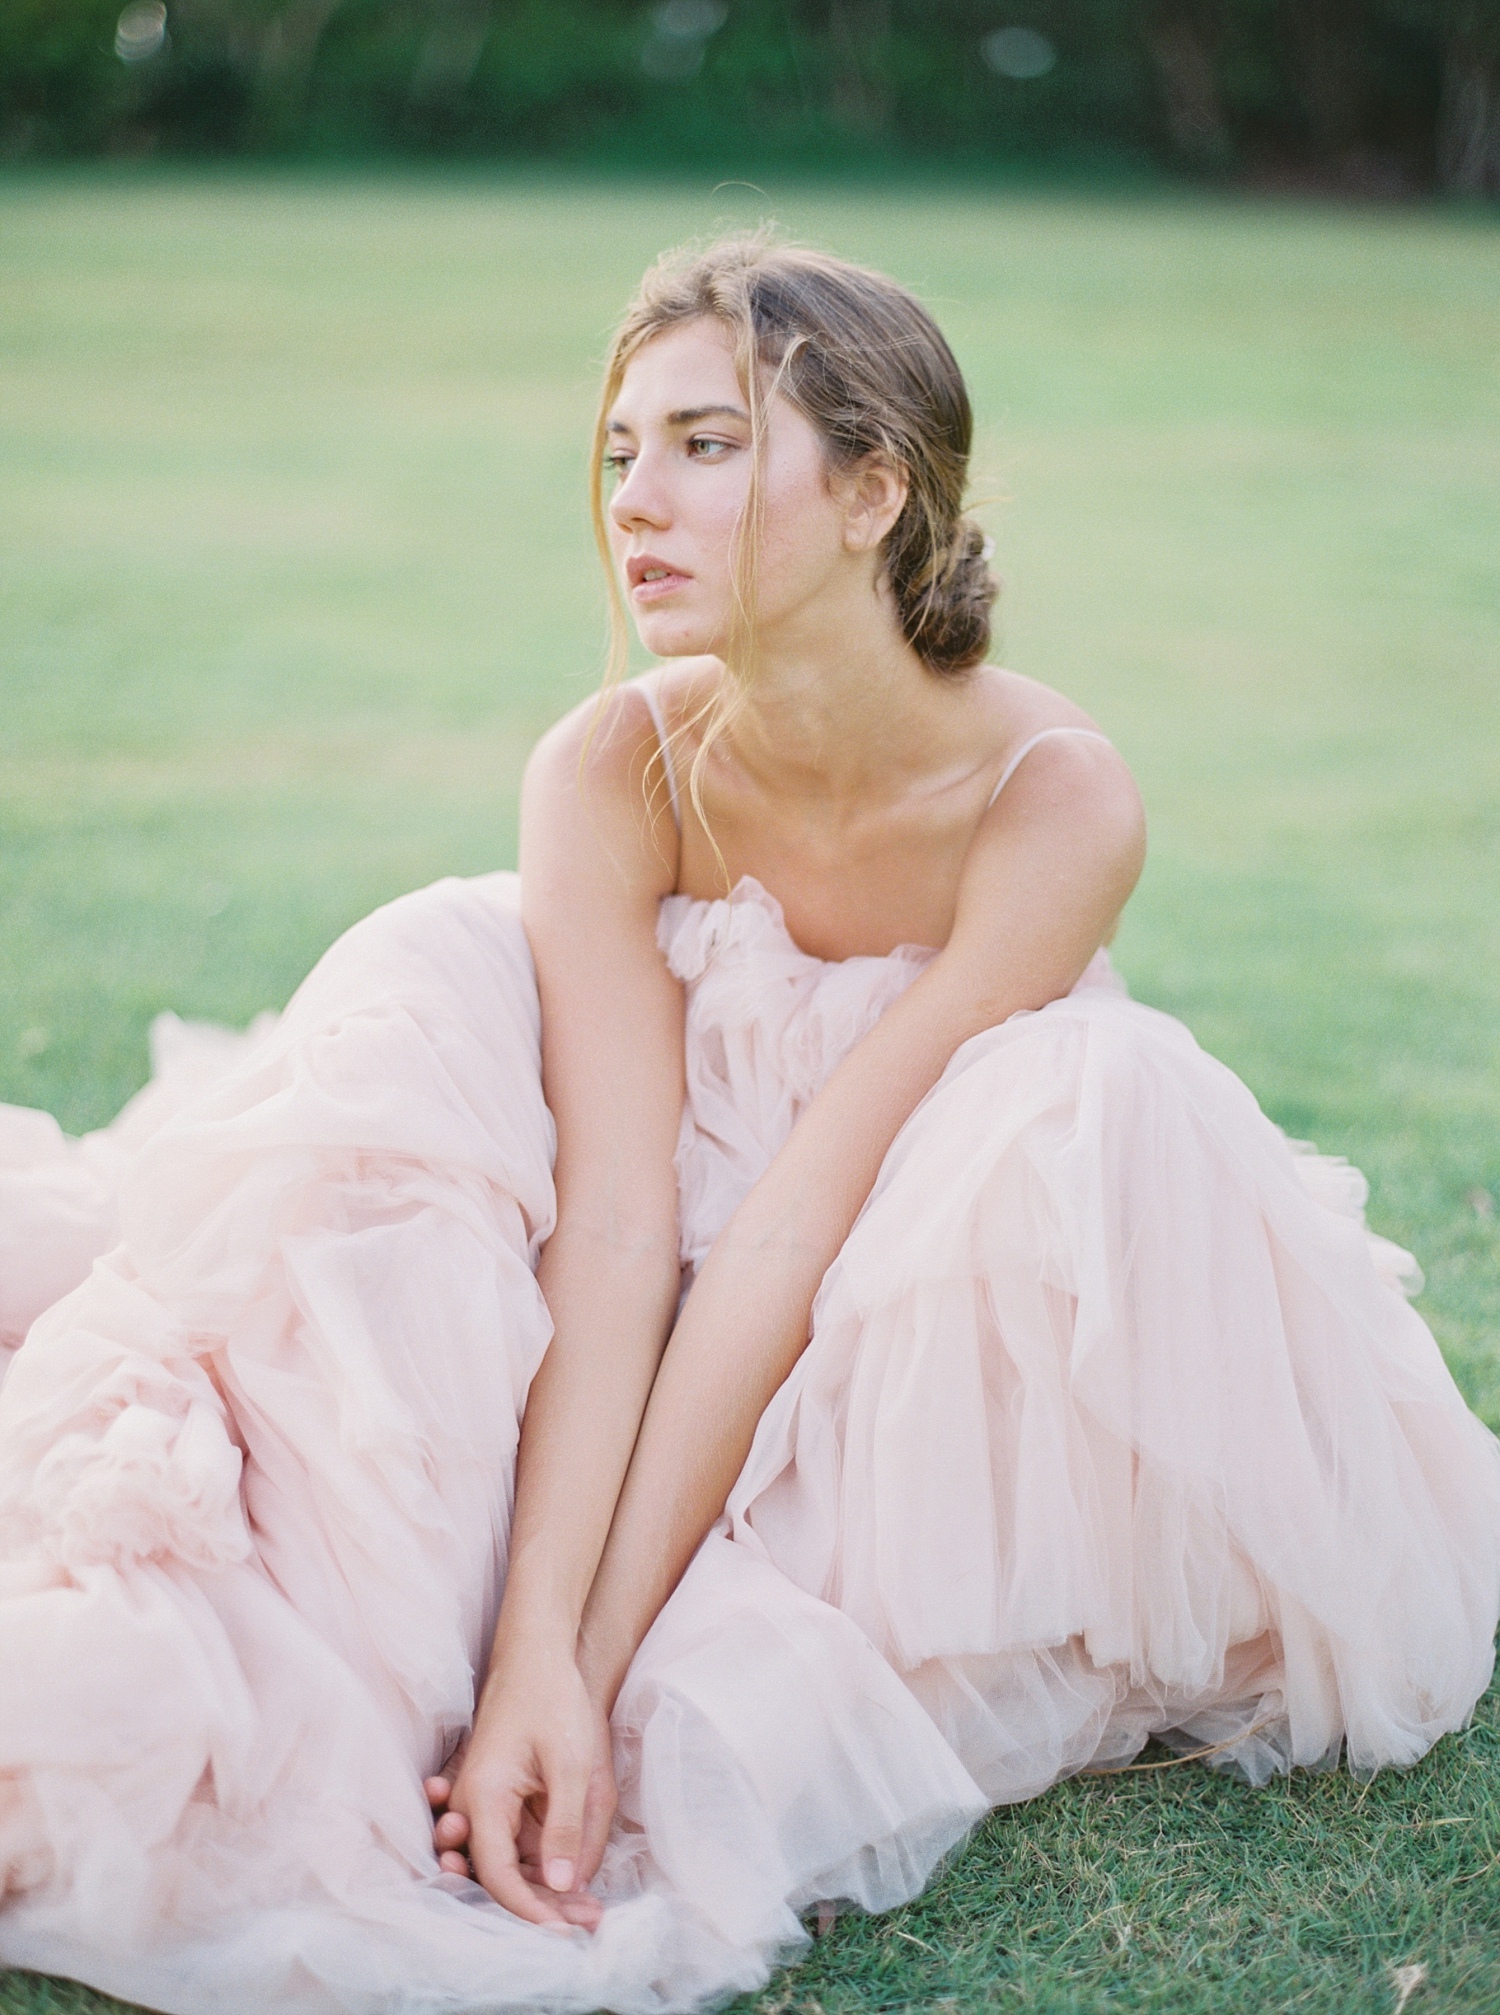 https://aliceahnphotography.com/wp-content/uploads/2019/08/The-Dreamiest-Ruffled-Wedding-Dress-That-Will-Leave-You-Blushing_1245.jpg